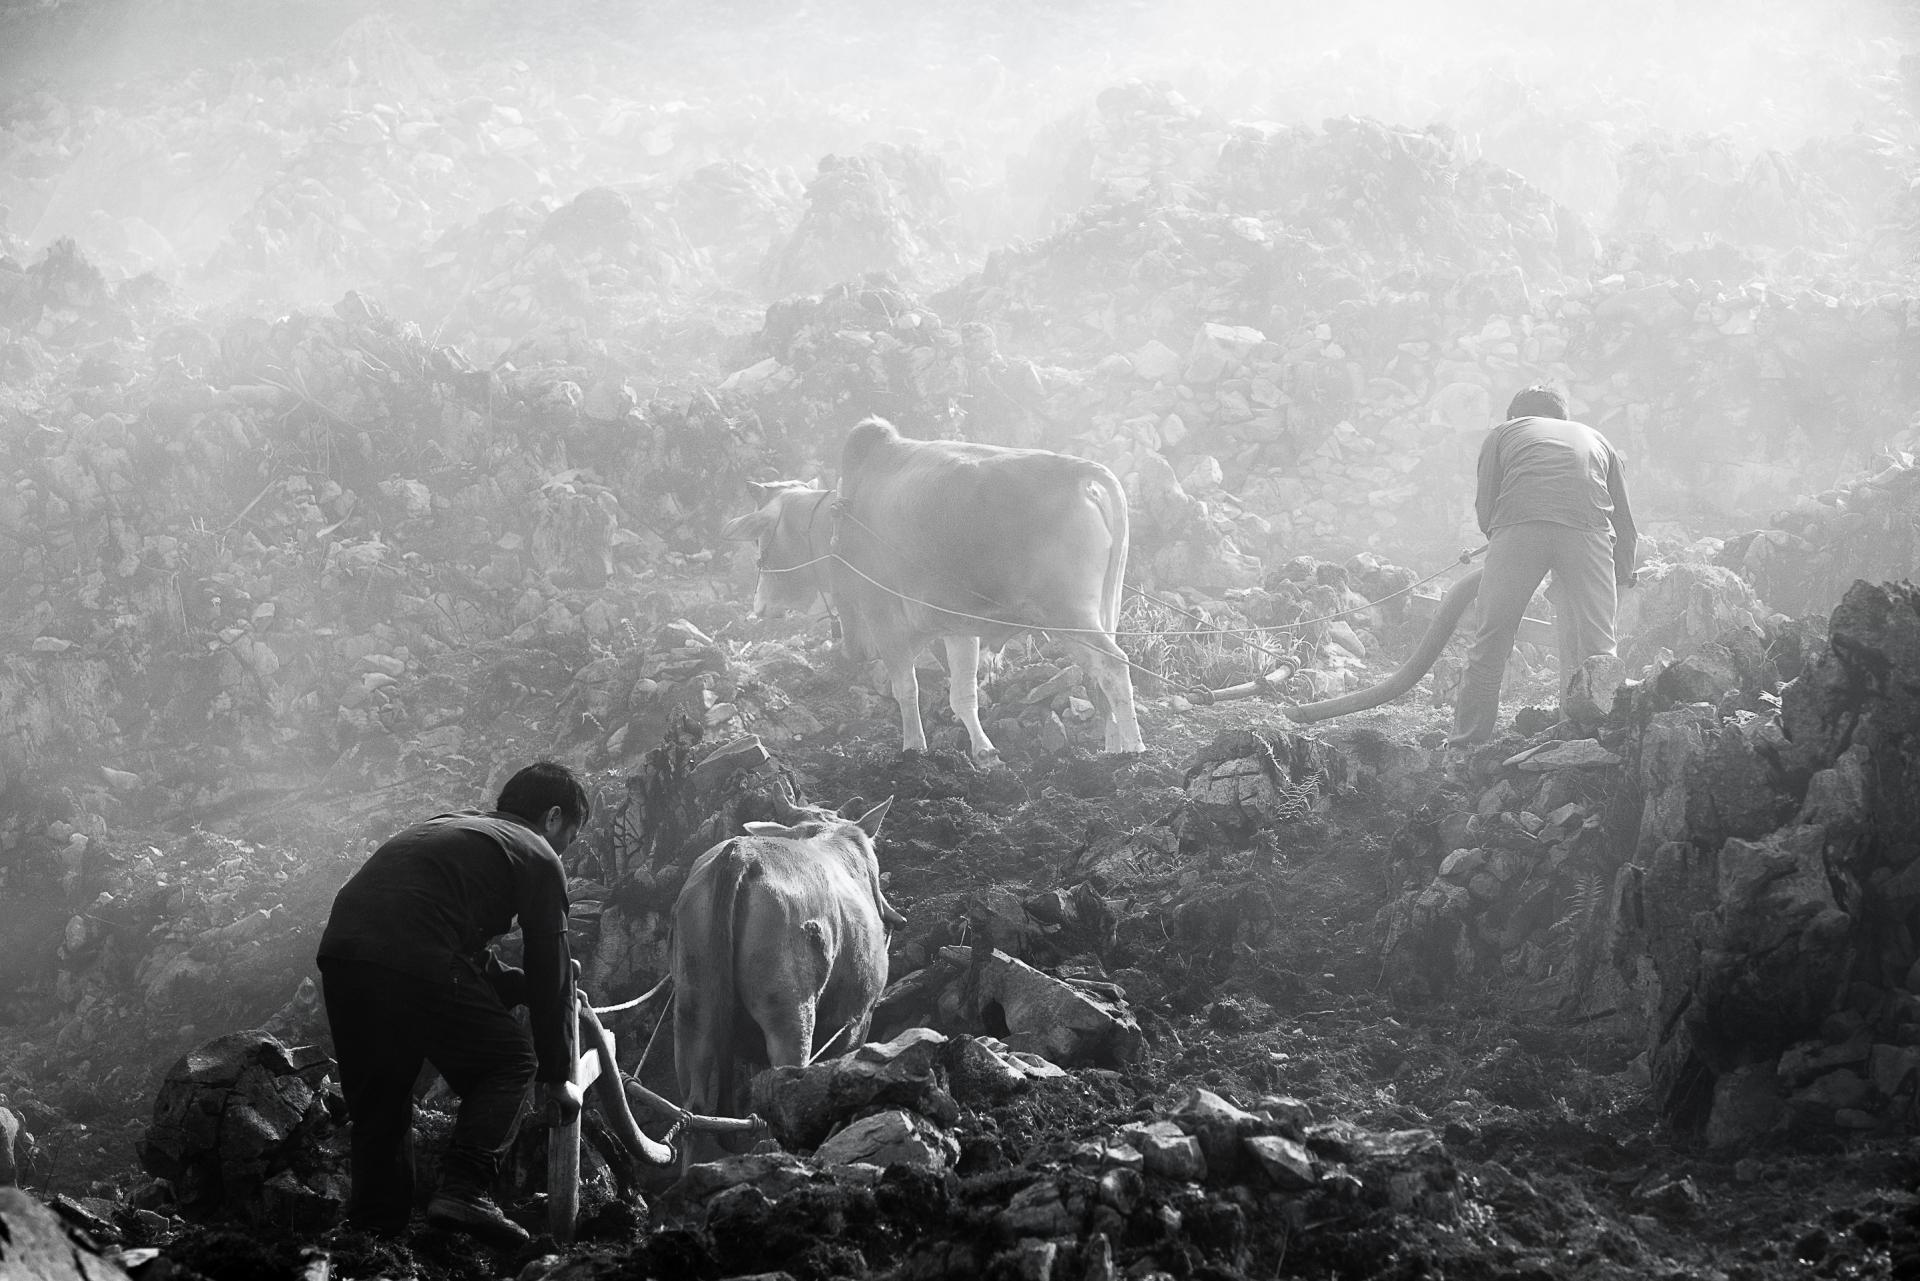 New York Photography Awards Winner - Plowing on the karst plateau